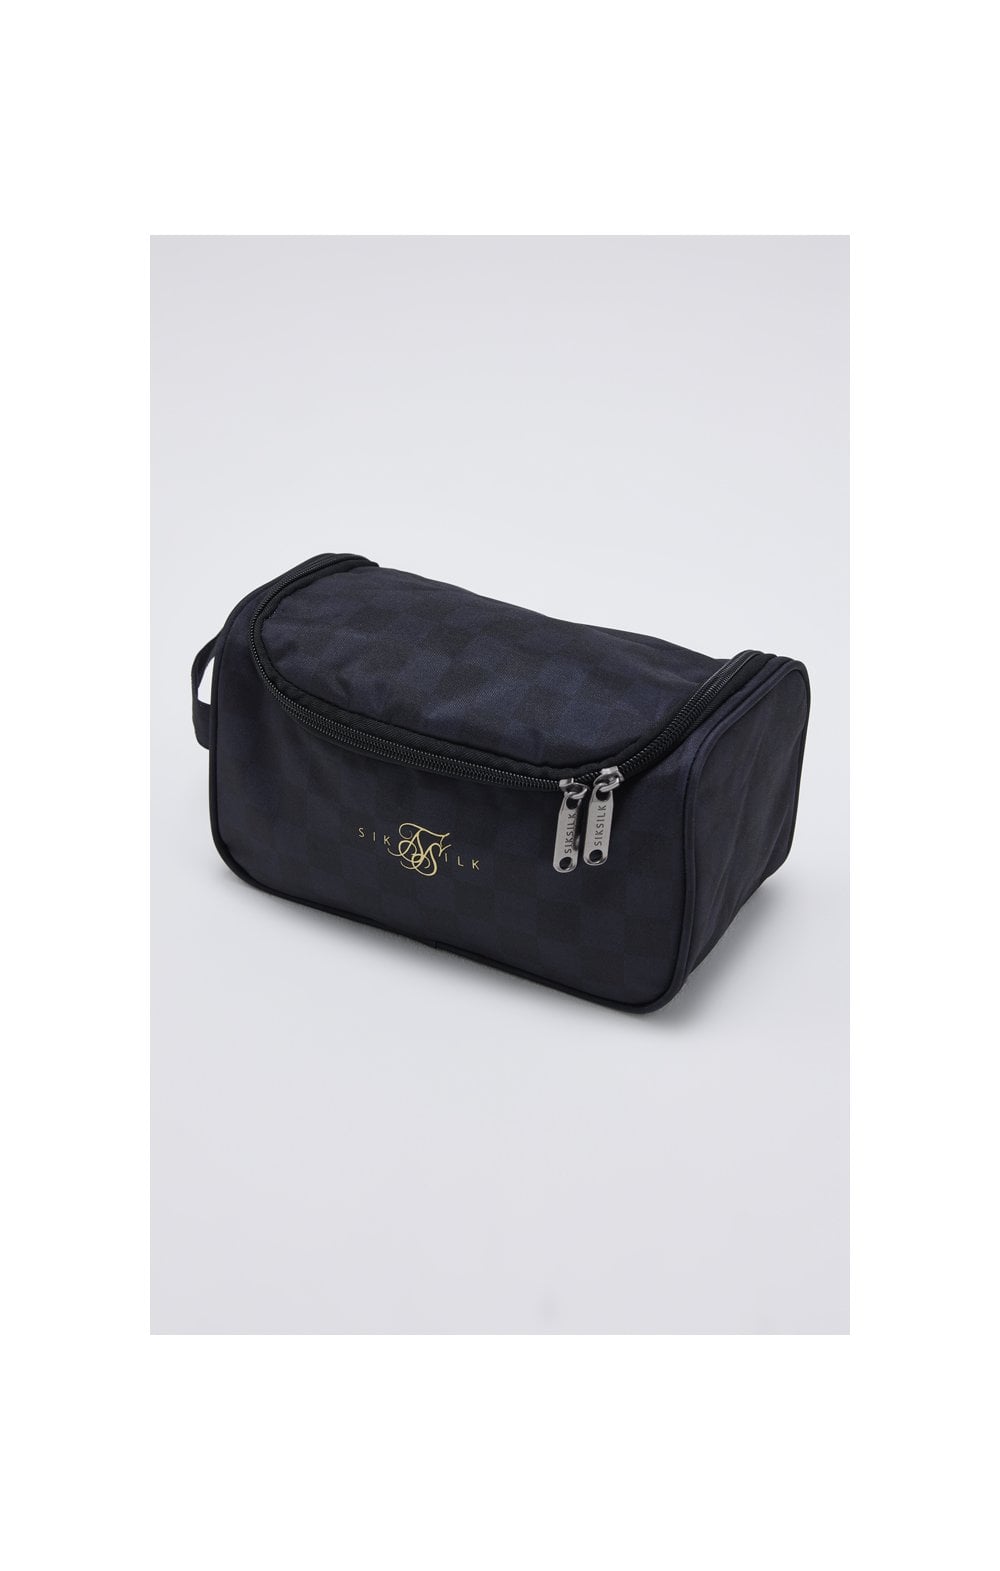 Load image into Gallery viewer, SikSilk Elite Checkered Wash Bag - Black